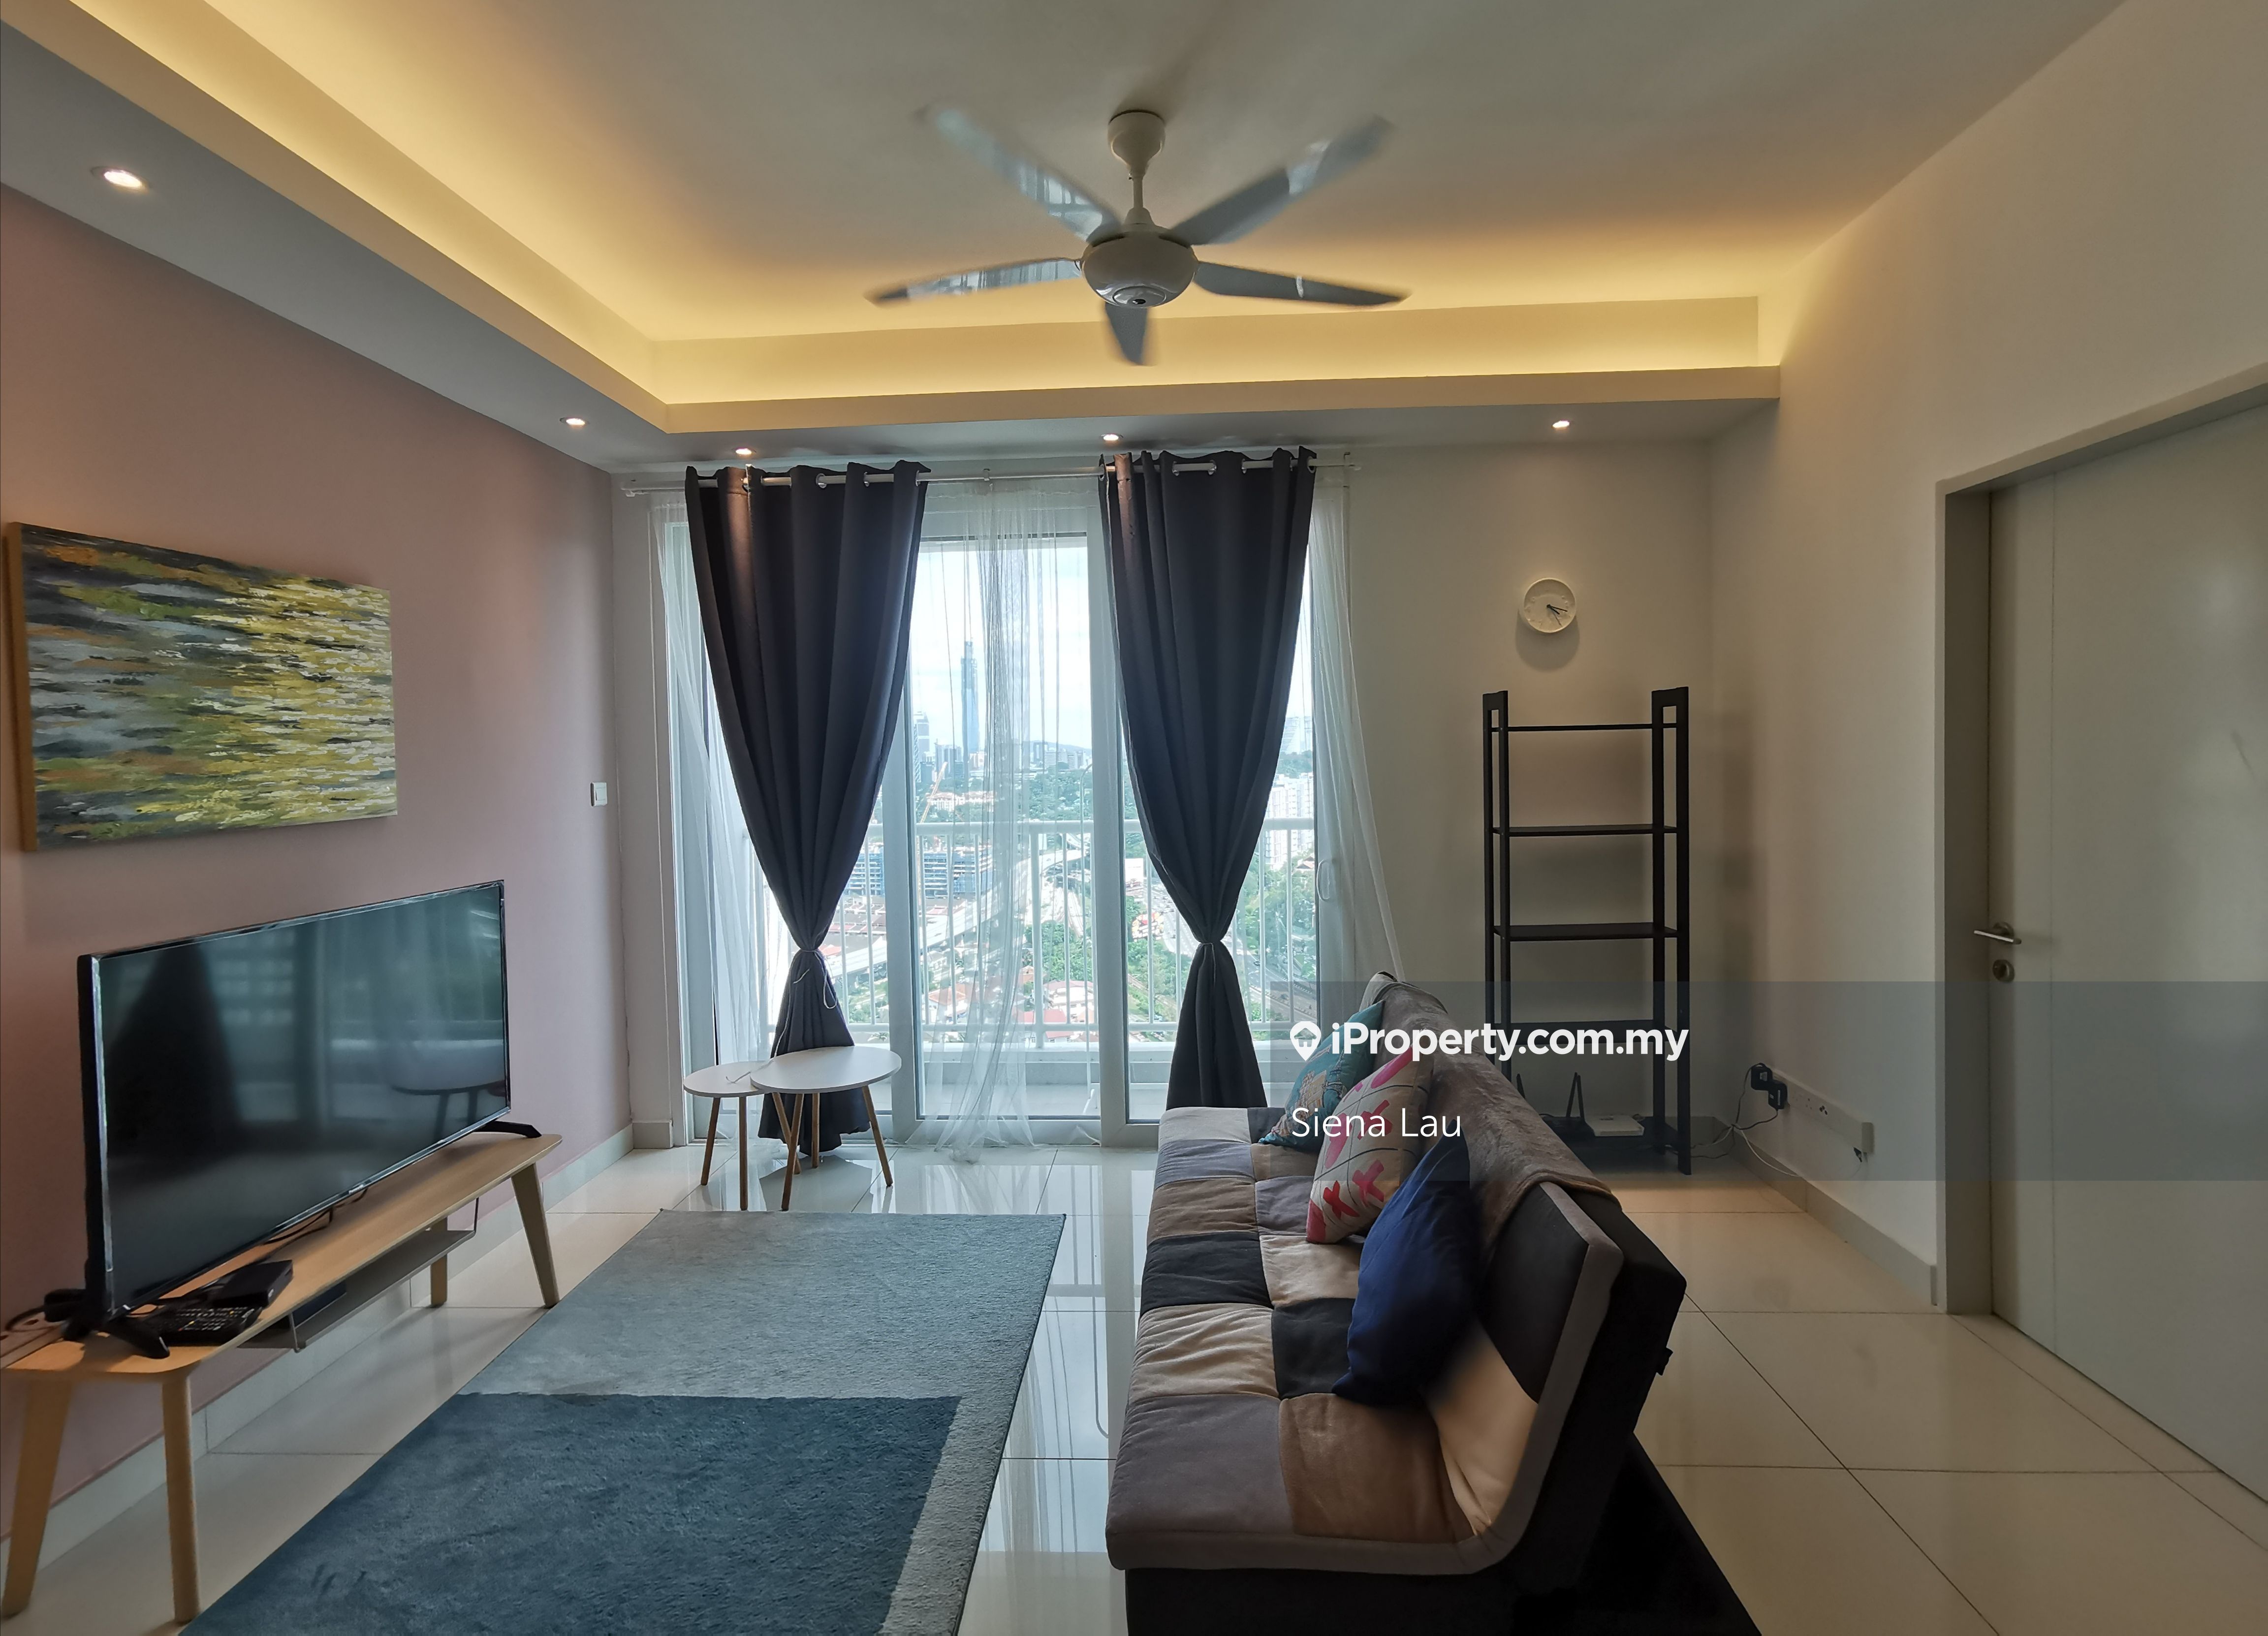 Court 28 Serviced Residence 2 bedrooms for rent in Jalan Ipoh, Kuala ...